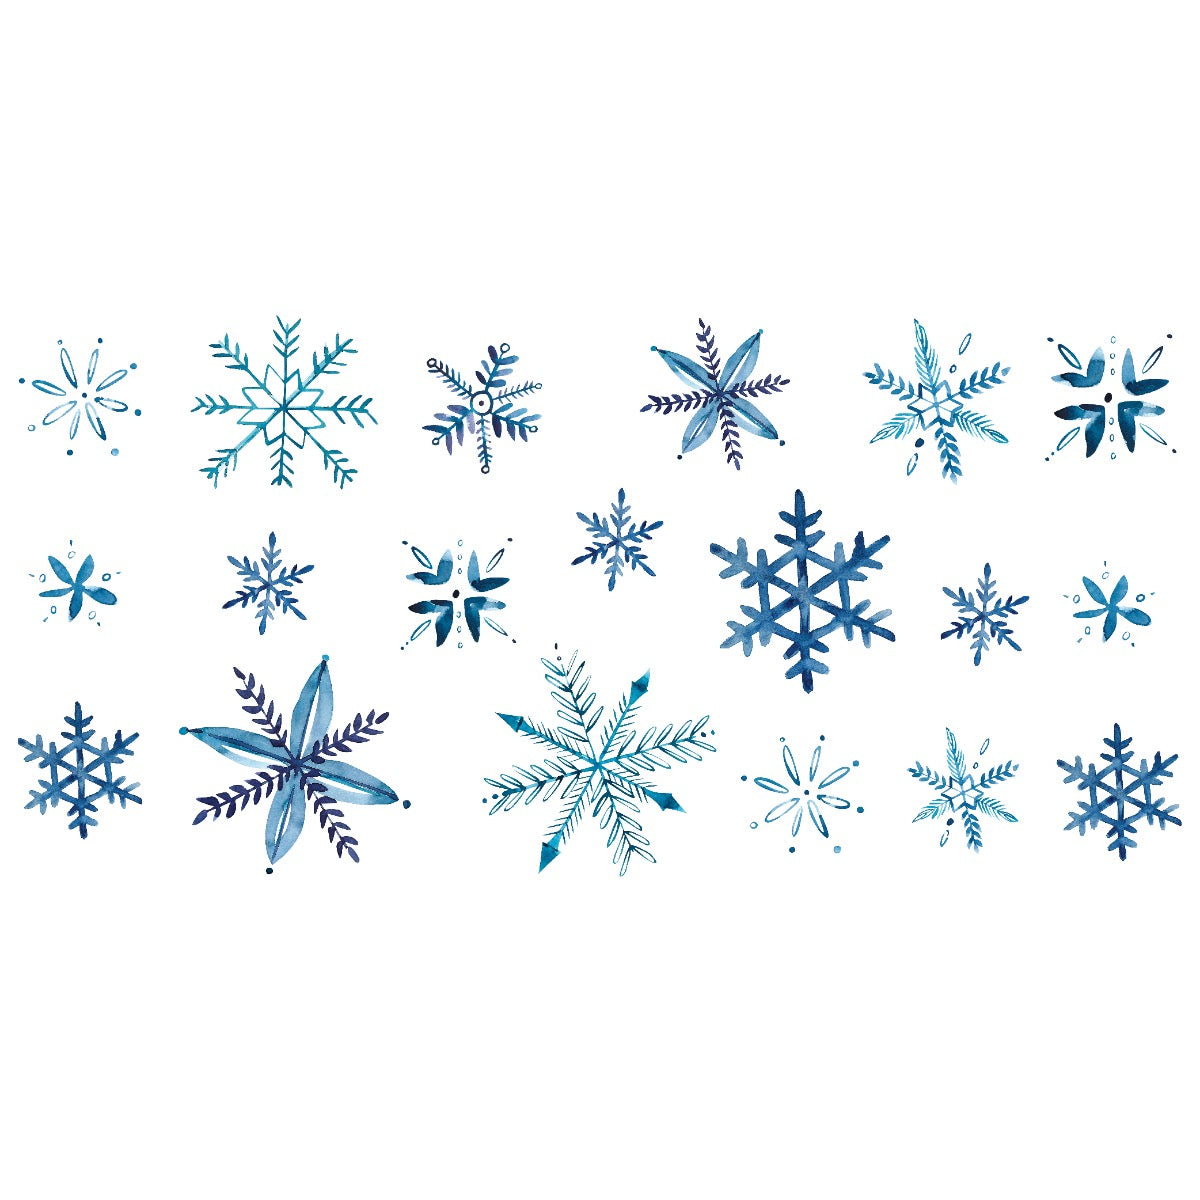 Small Snowflakes Set of 30 Vinyl Lettering Wall Pattern Decals (Navy)